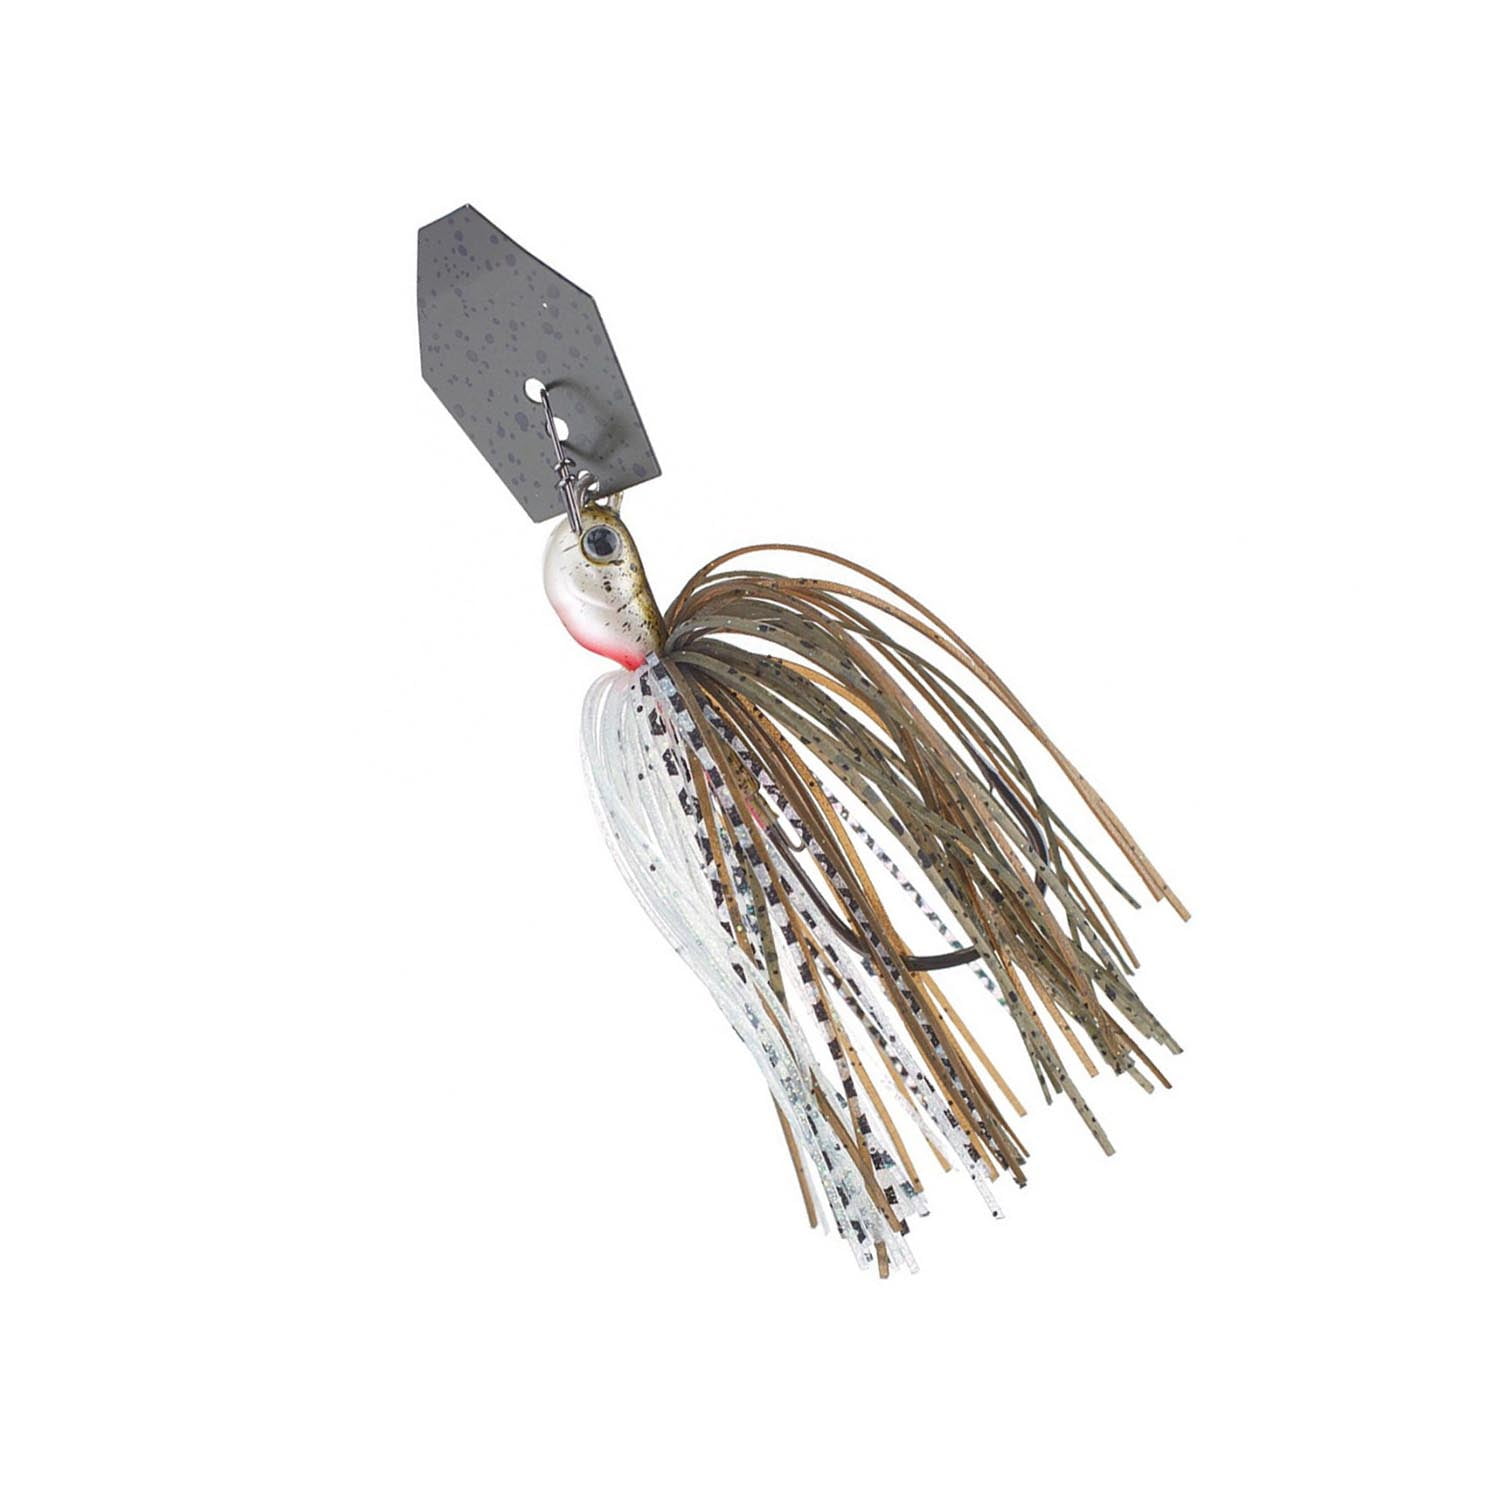 New Jack Hammer Bladed Jig from Z-Man - Fishing Tackle - Bass